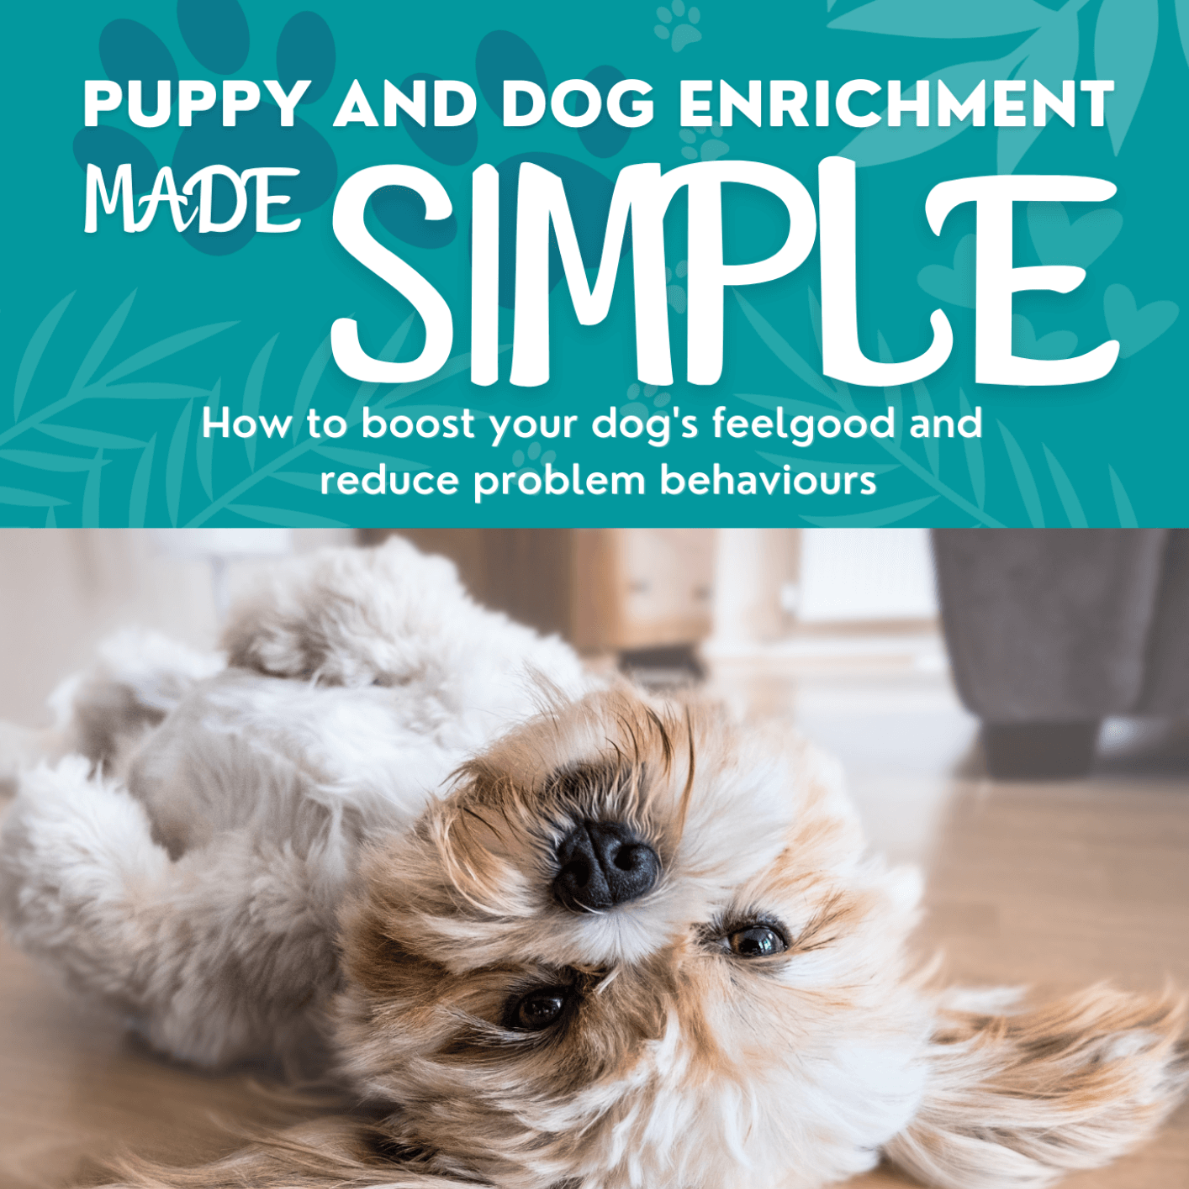 Enrichment for dogs made simple  Final 9 MARCH 2023 1 2png